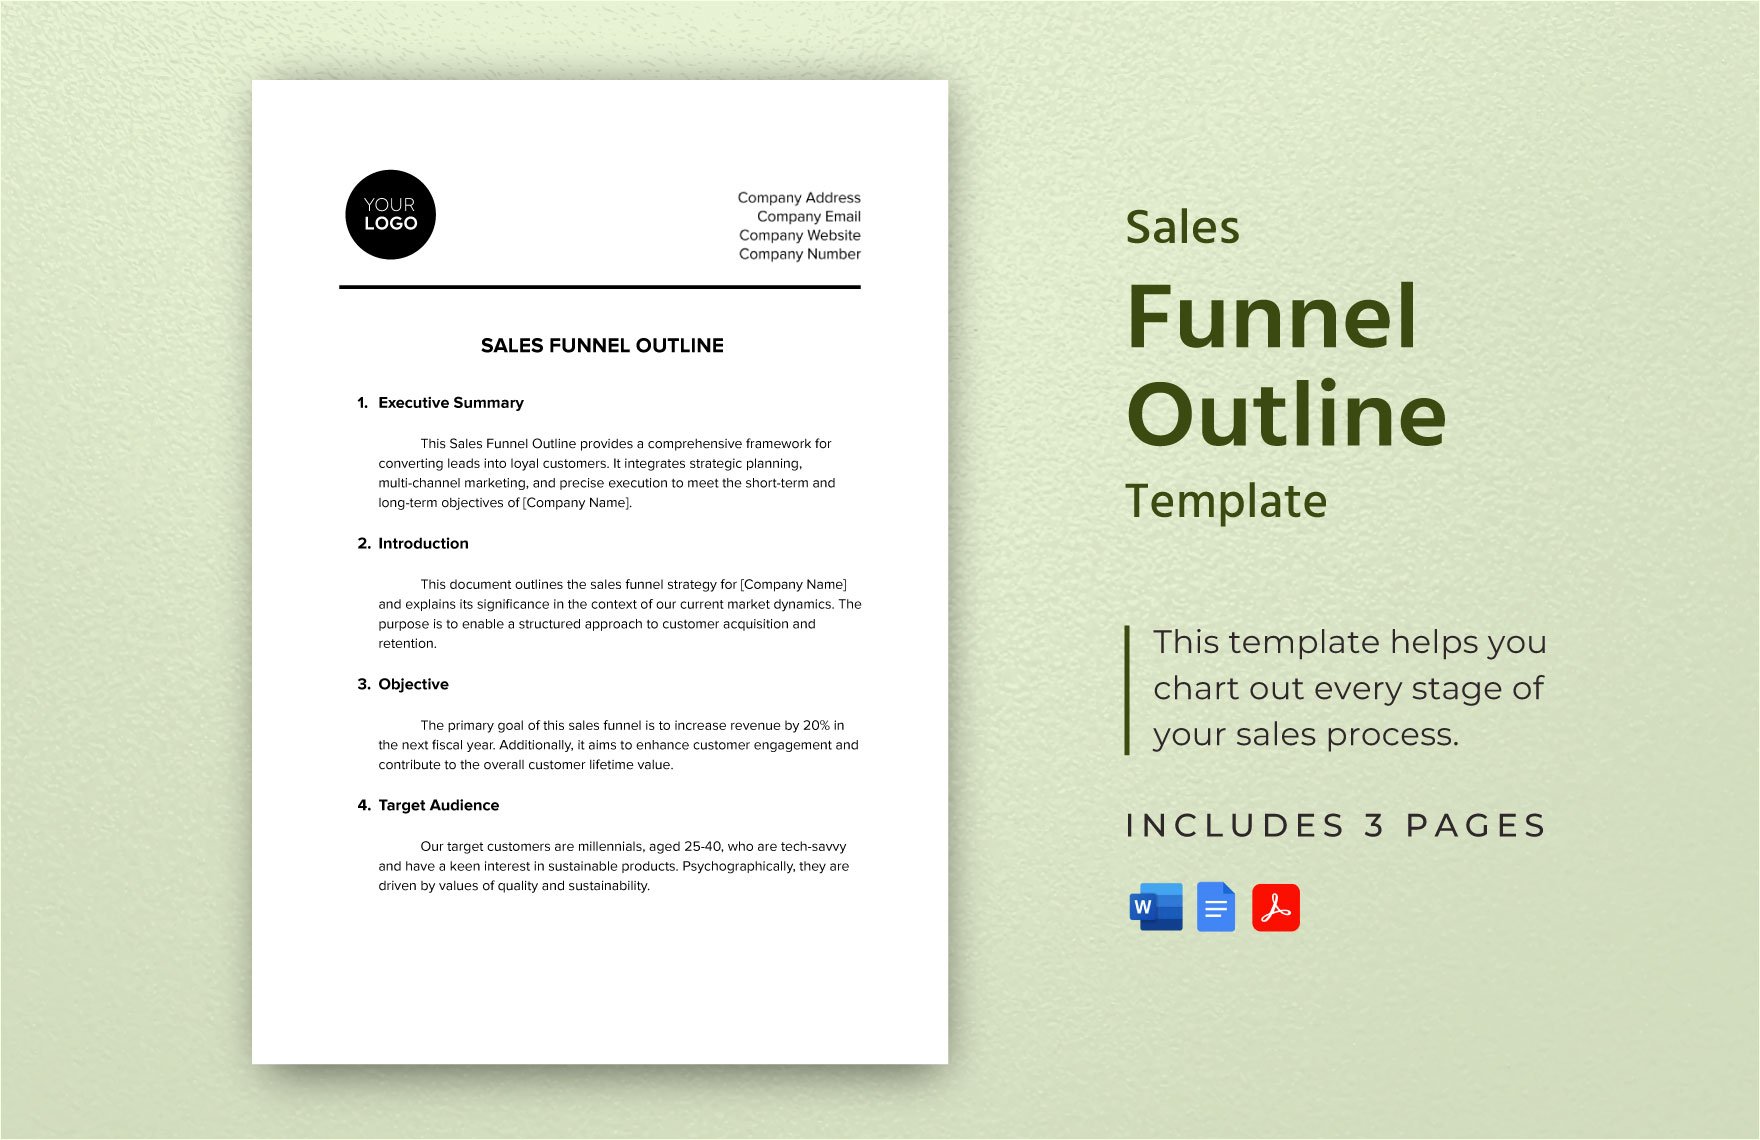 Client Tracker Template Google Sheets Excel Spreadsheet – Savvy and Thriving